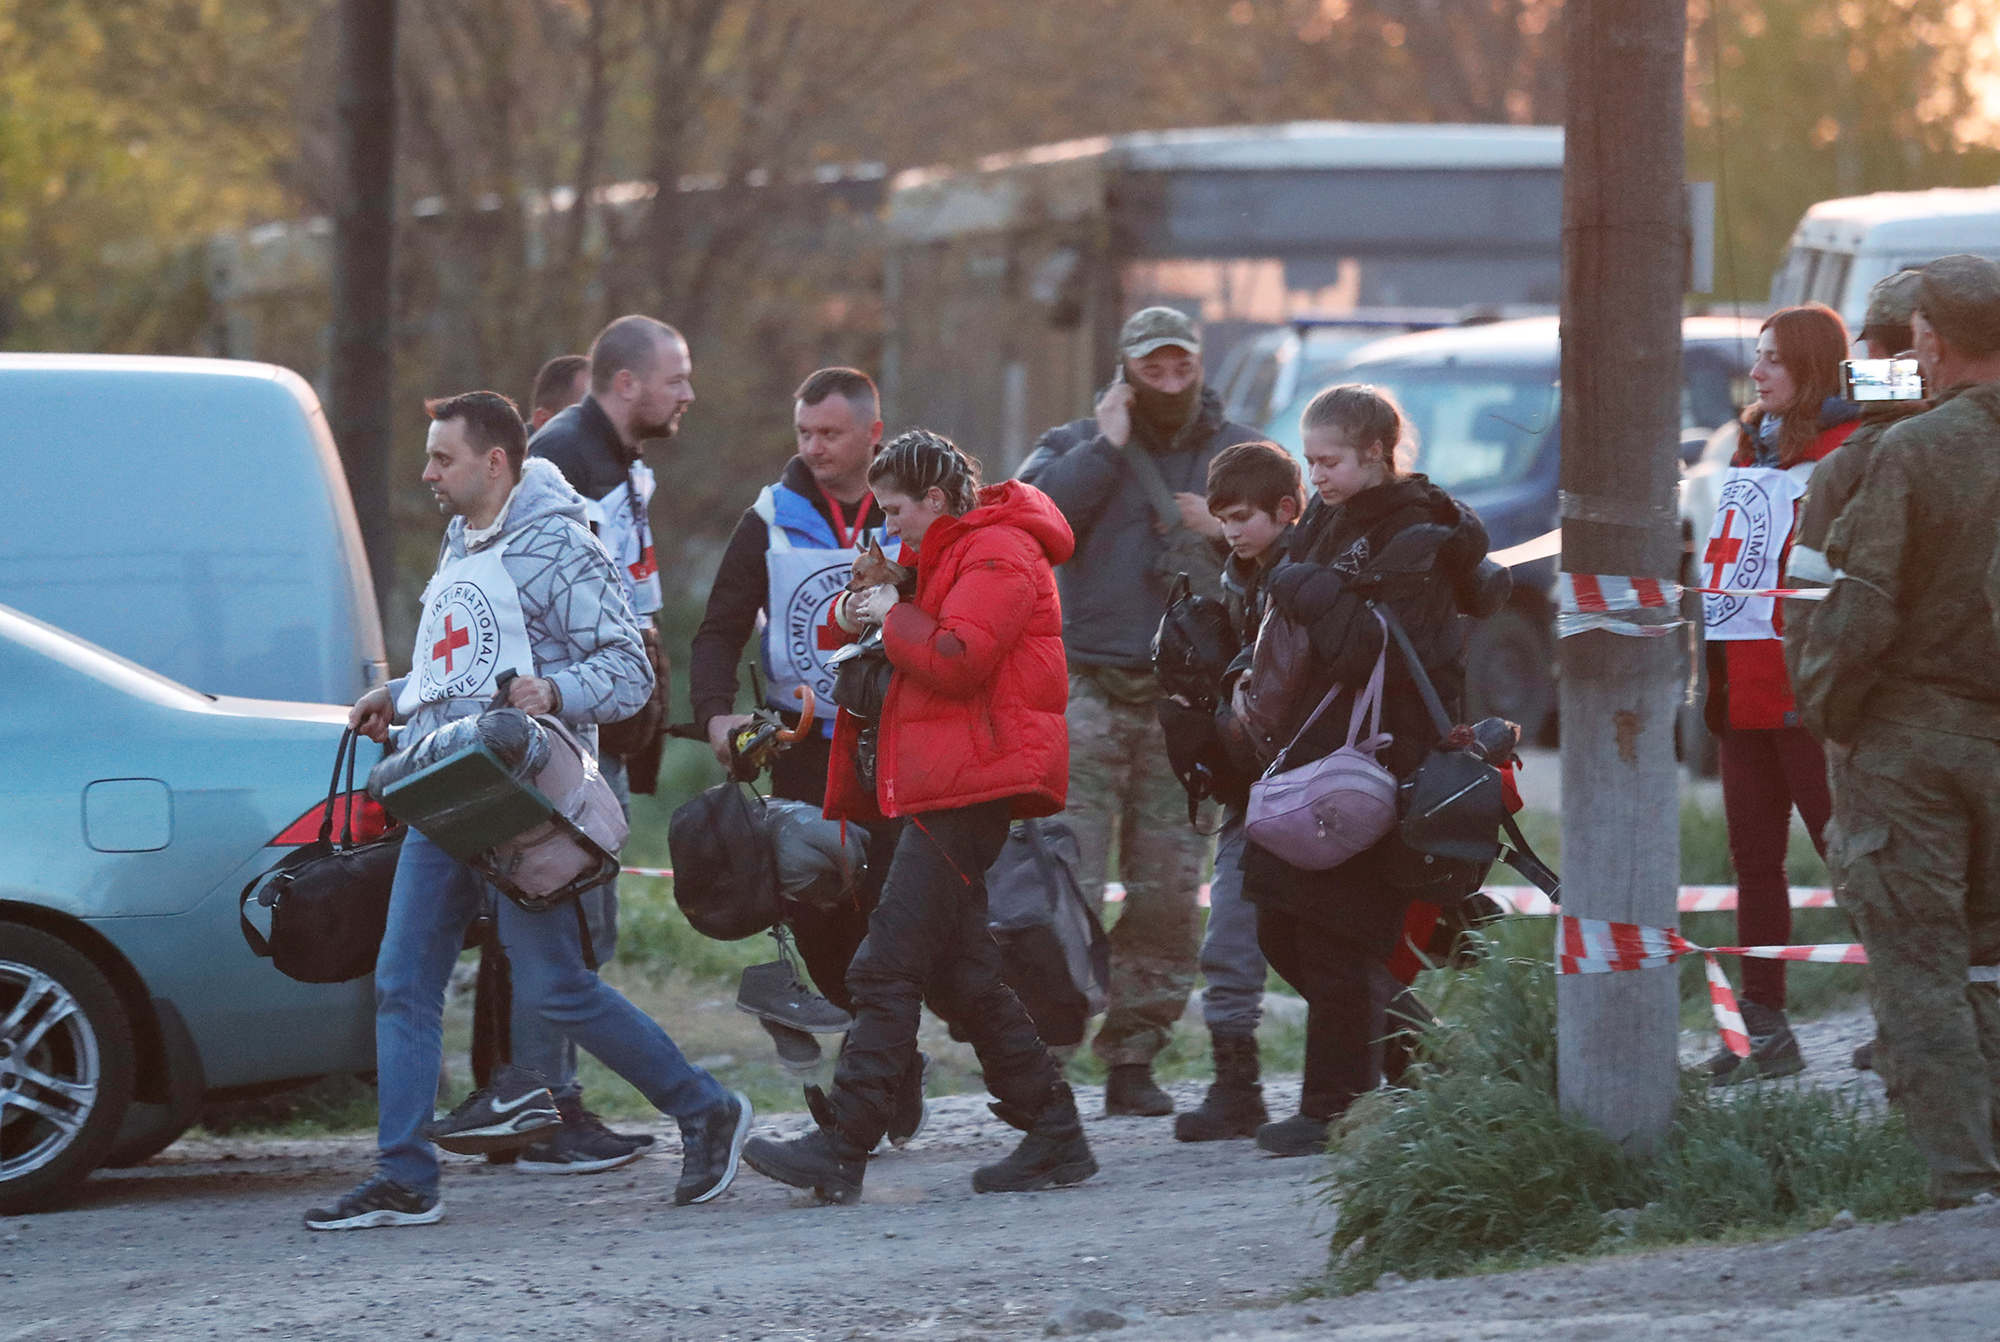 Civilians evacuated from the Azovstal steel plant in Mariupol arrive at a temporary accommodation center in the village of Bezimenne, Ukraine on May 6.